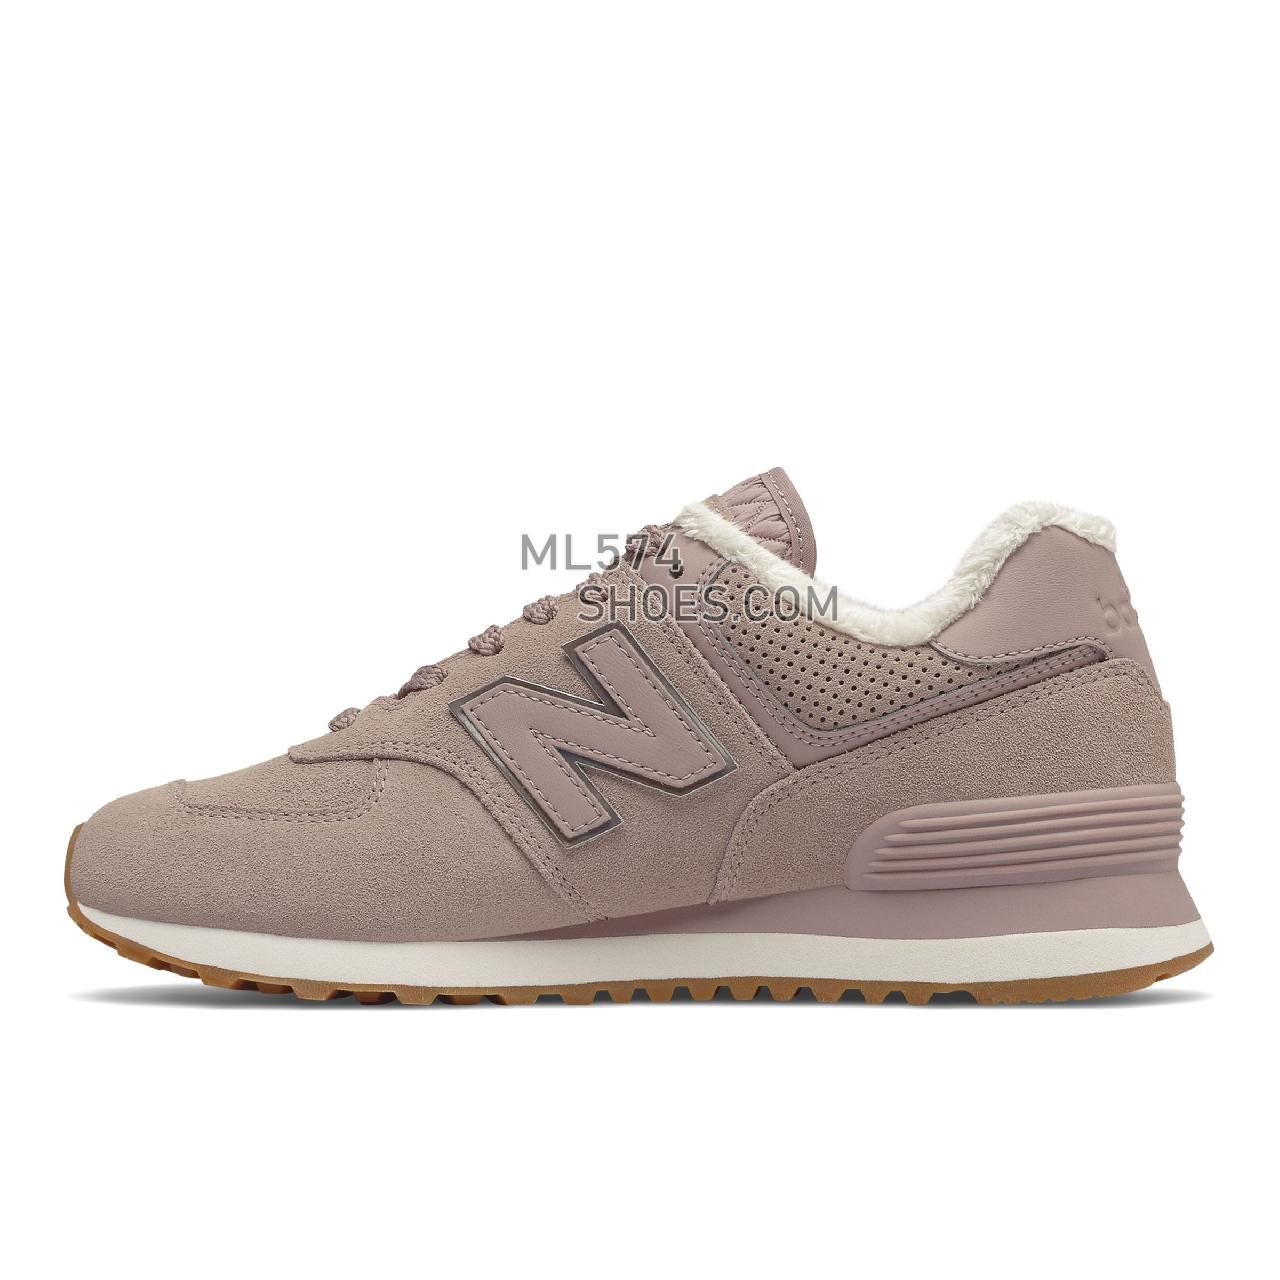 New Balance 574 - Women's Classic Sneakers - Au Lait with Gold - WL574LW2